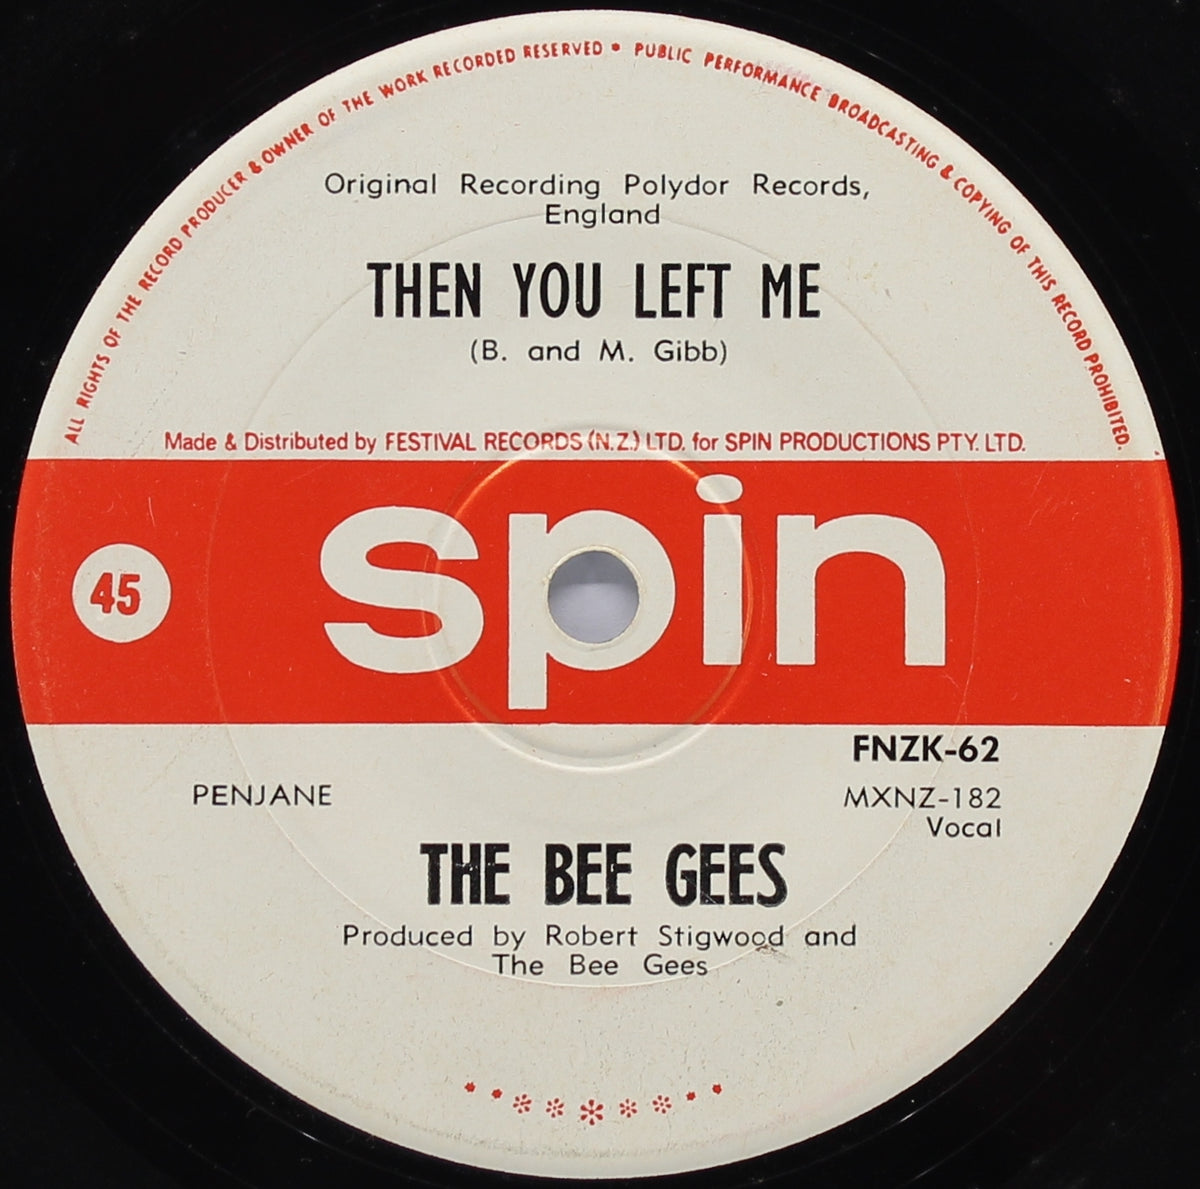 Bee Gees, If Only I Had My Mind On Something Else, Vinyl 7&quot; EP (45rpm), New Zealand 1970